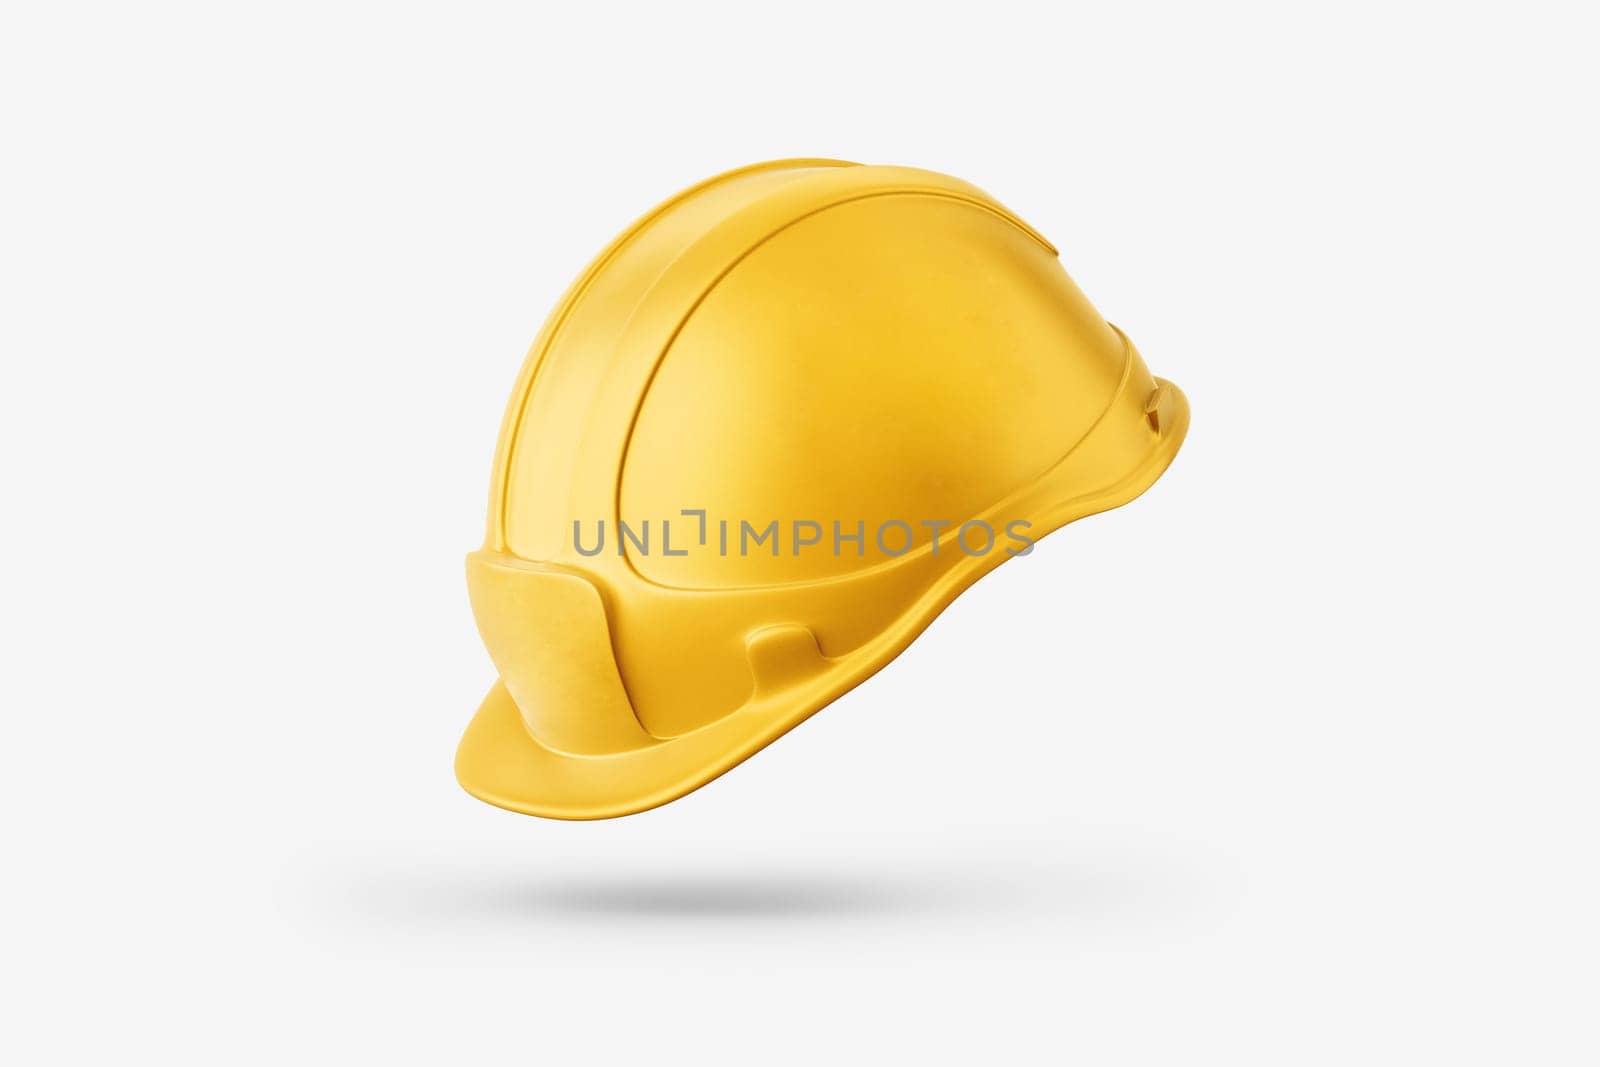 Yellow construction helmet isolated on a white background by Mastak80